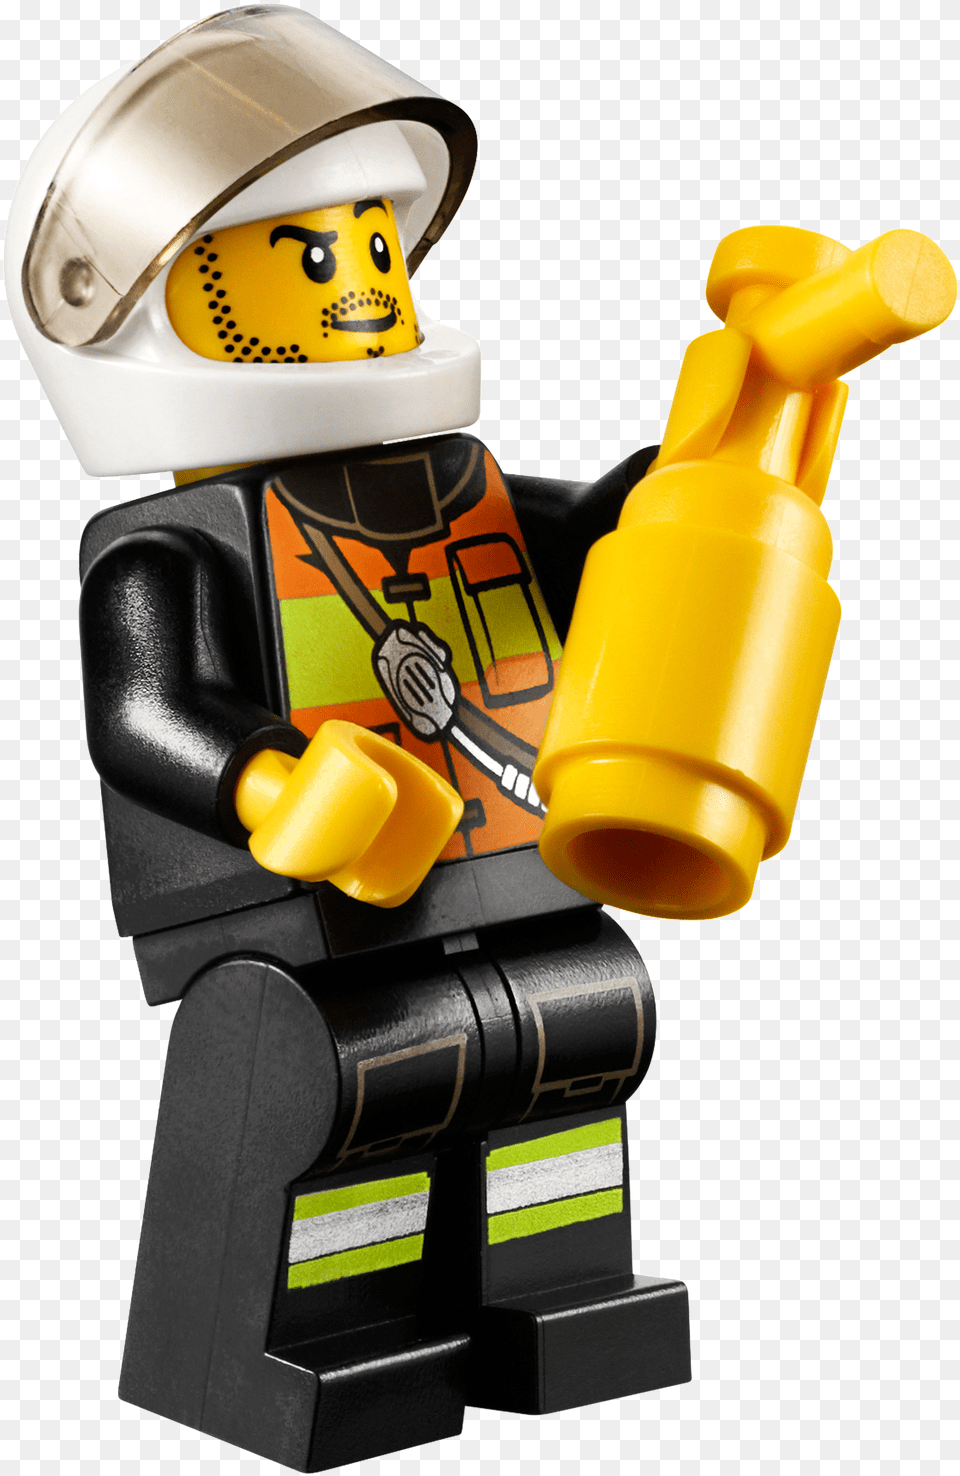 Fireman Lego City Motorcycle Free Png